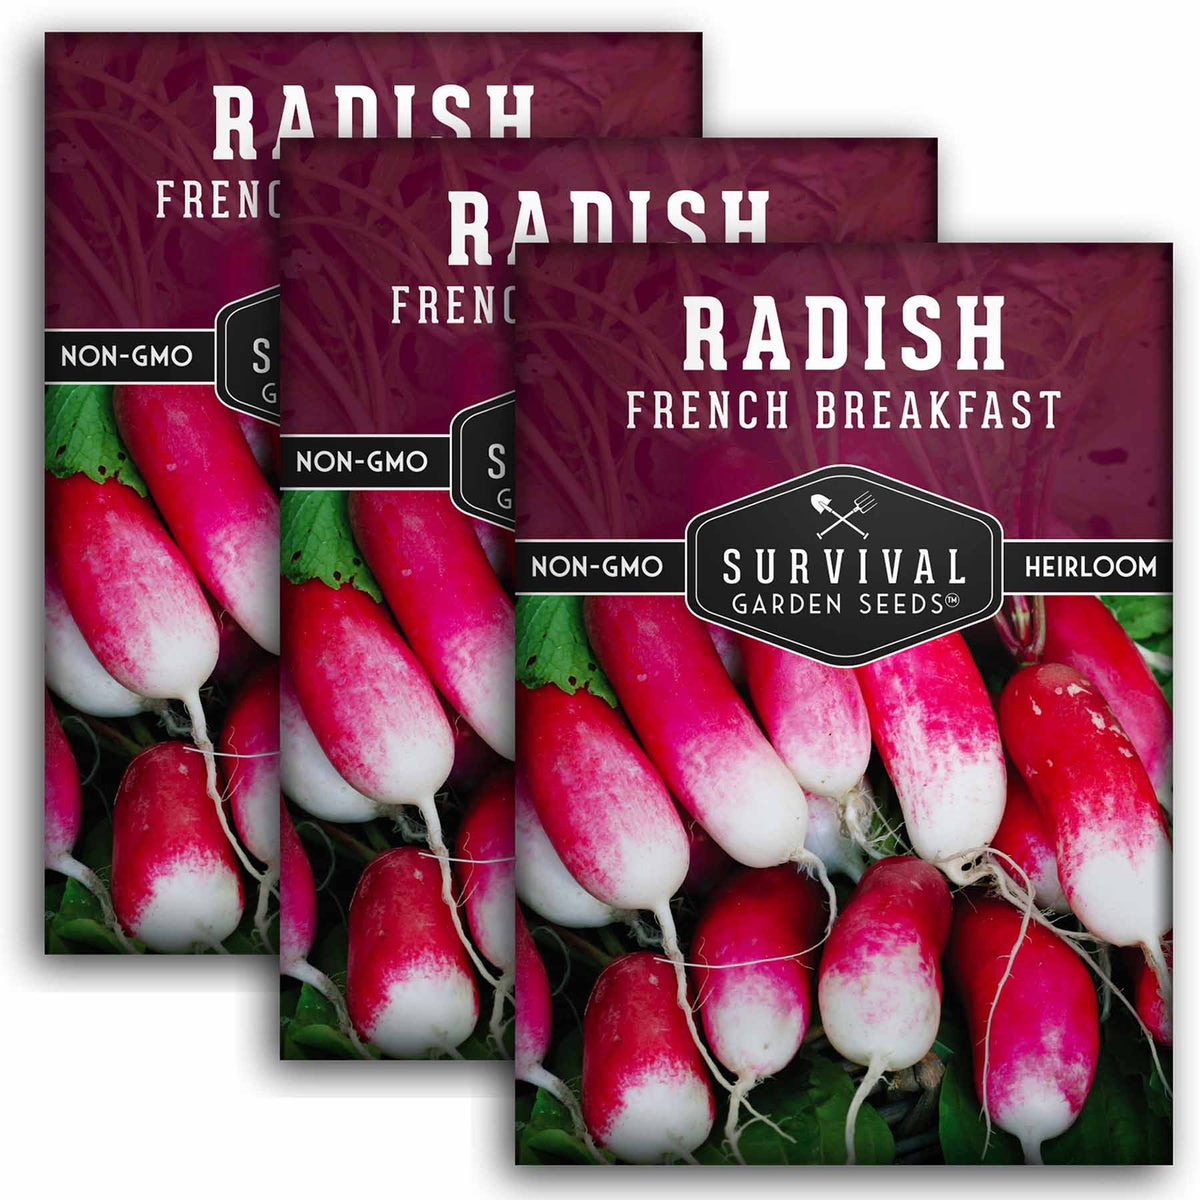 3 packets of French Breakfast Radish seeds